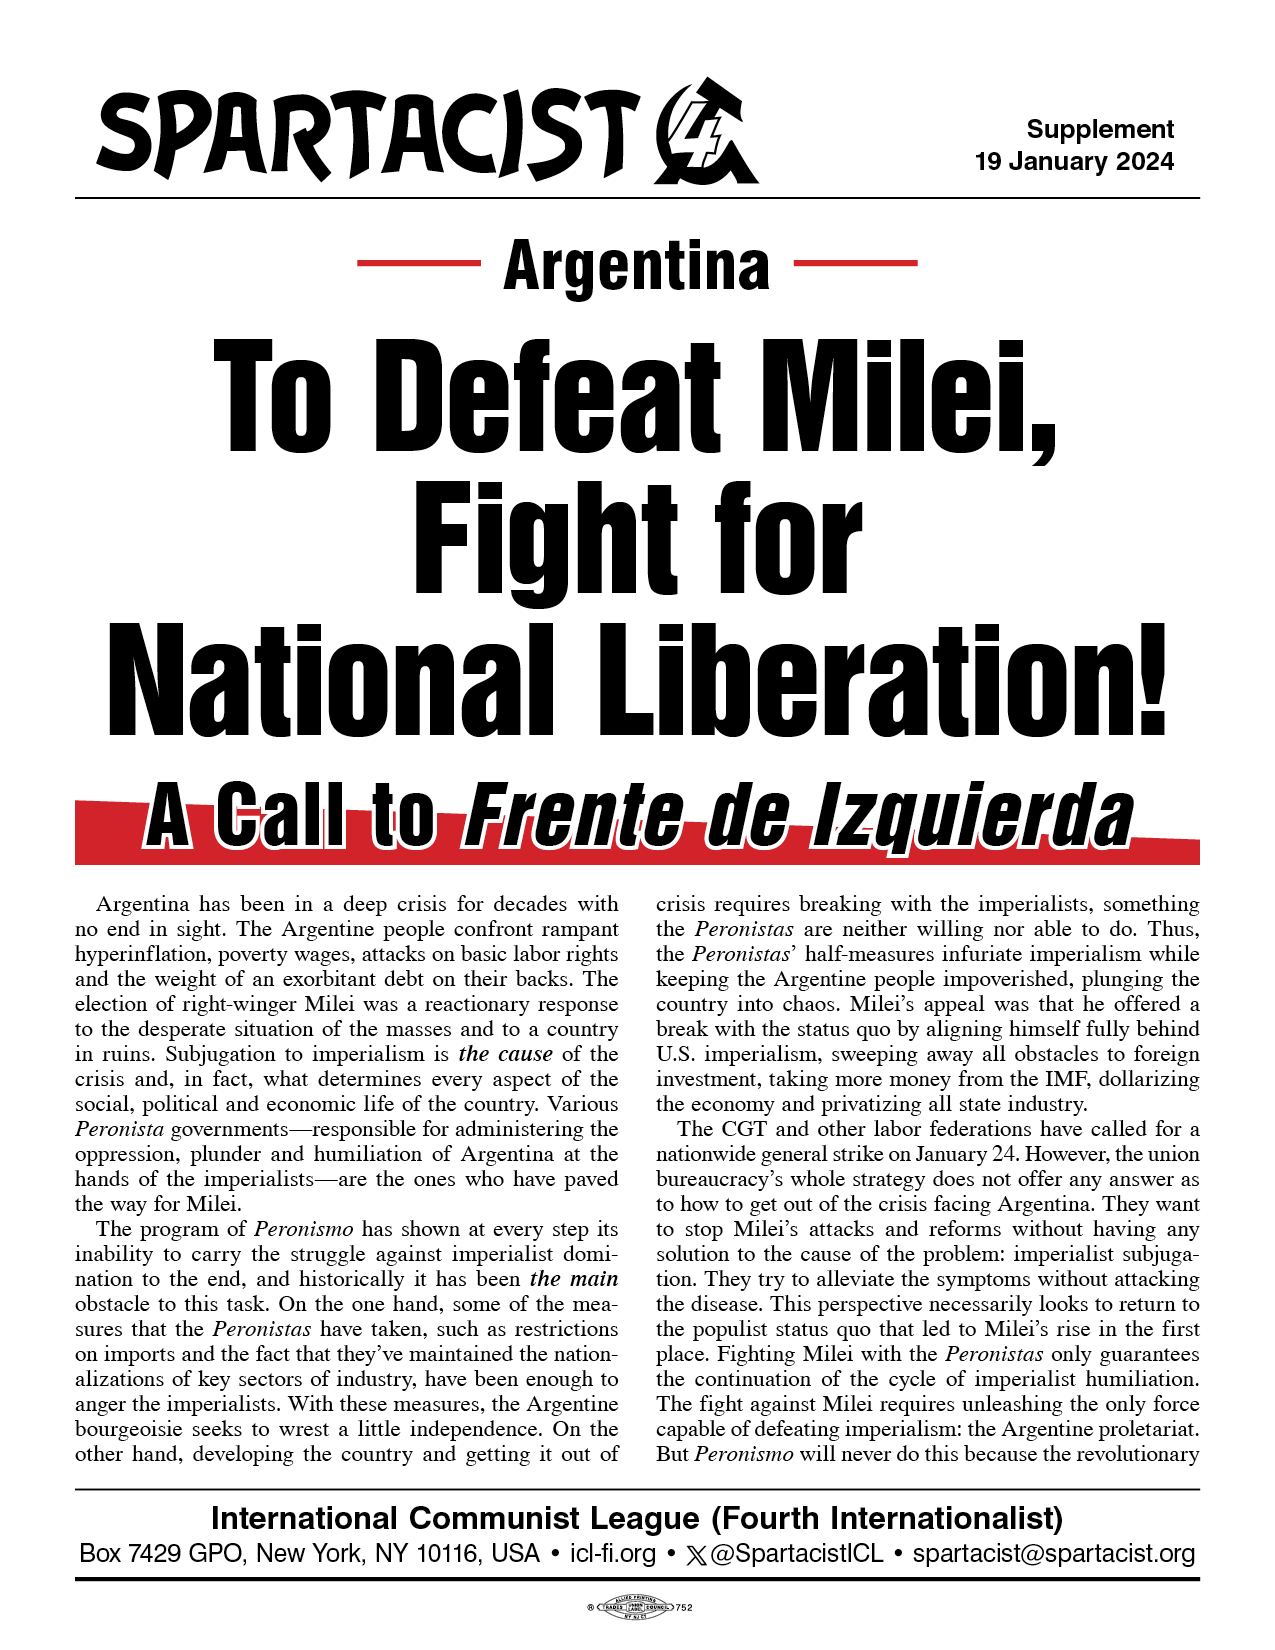 To Defeat Milei, Fight for National Liberation!